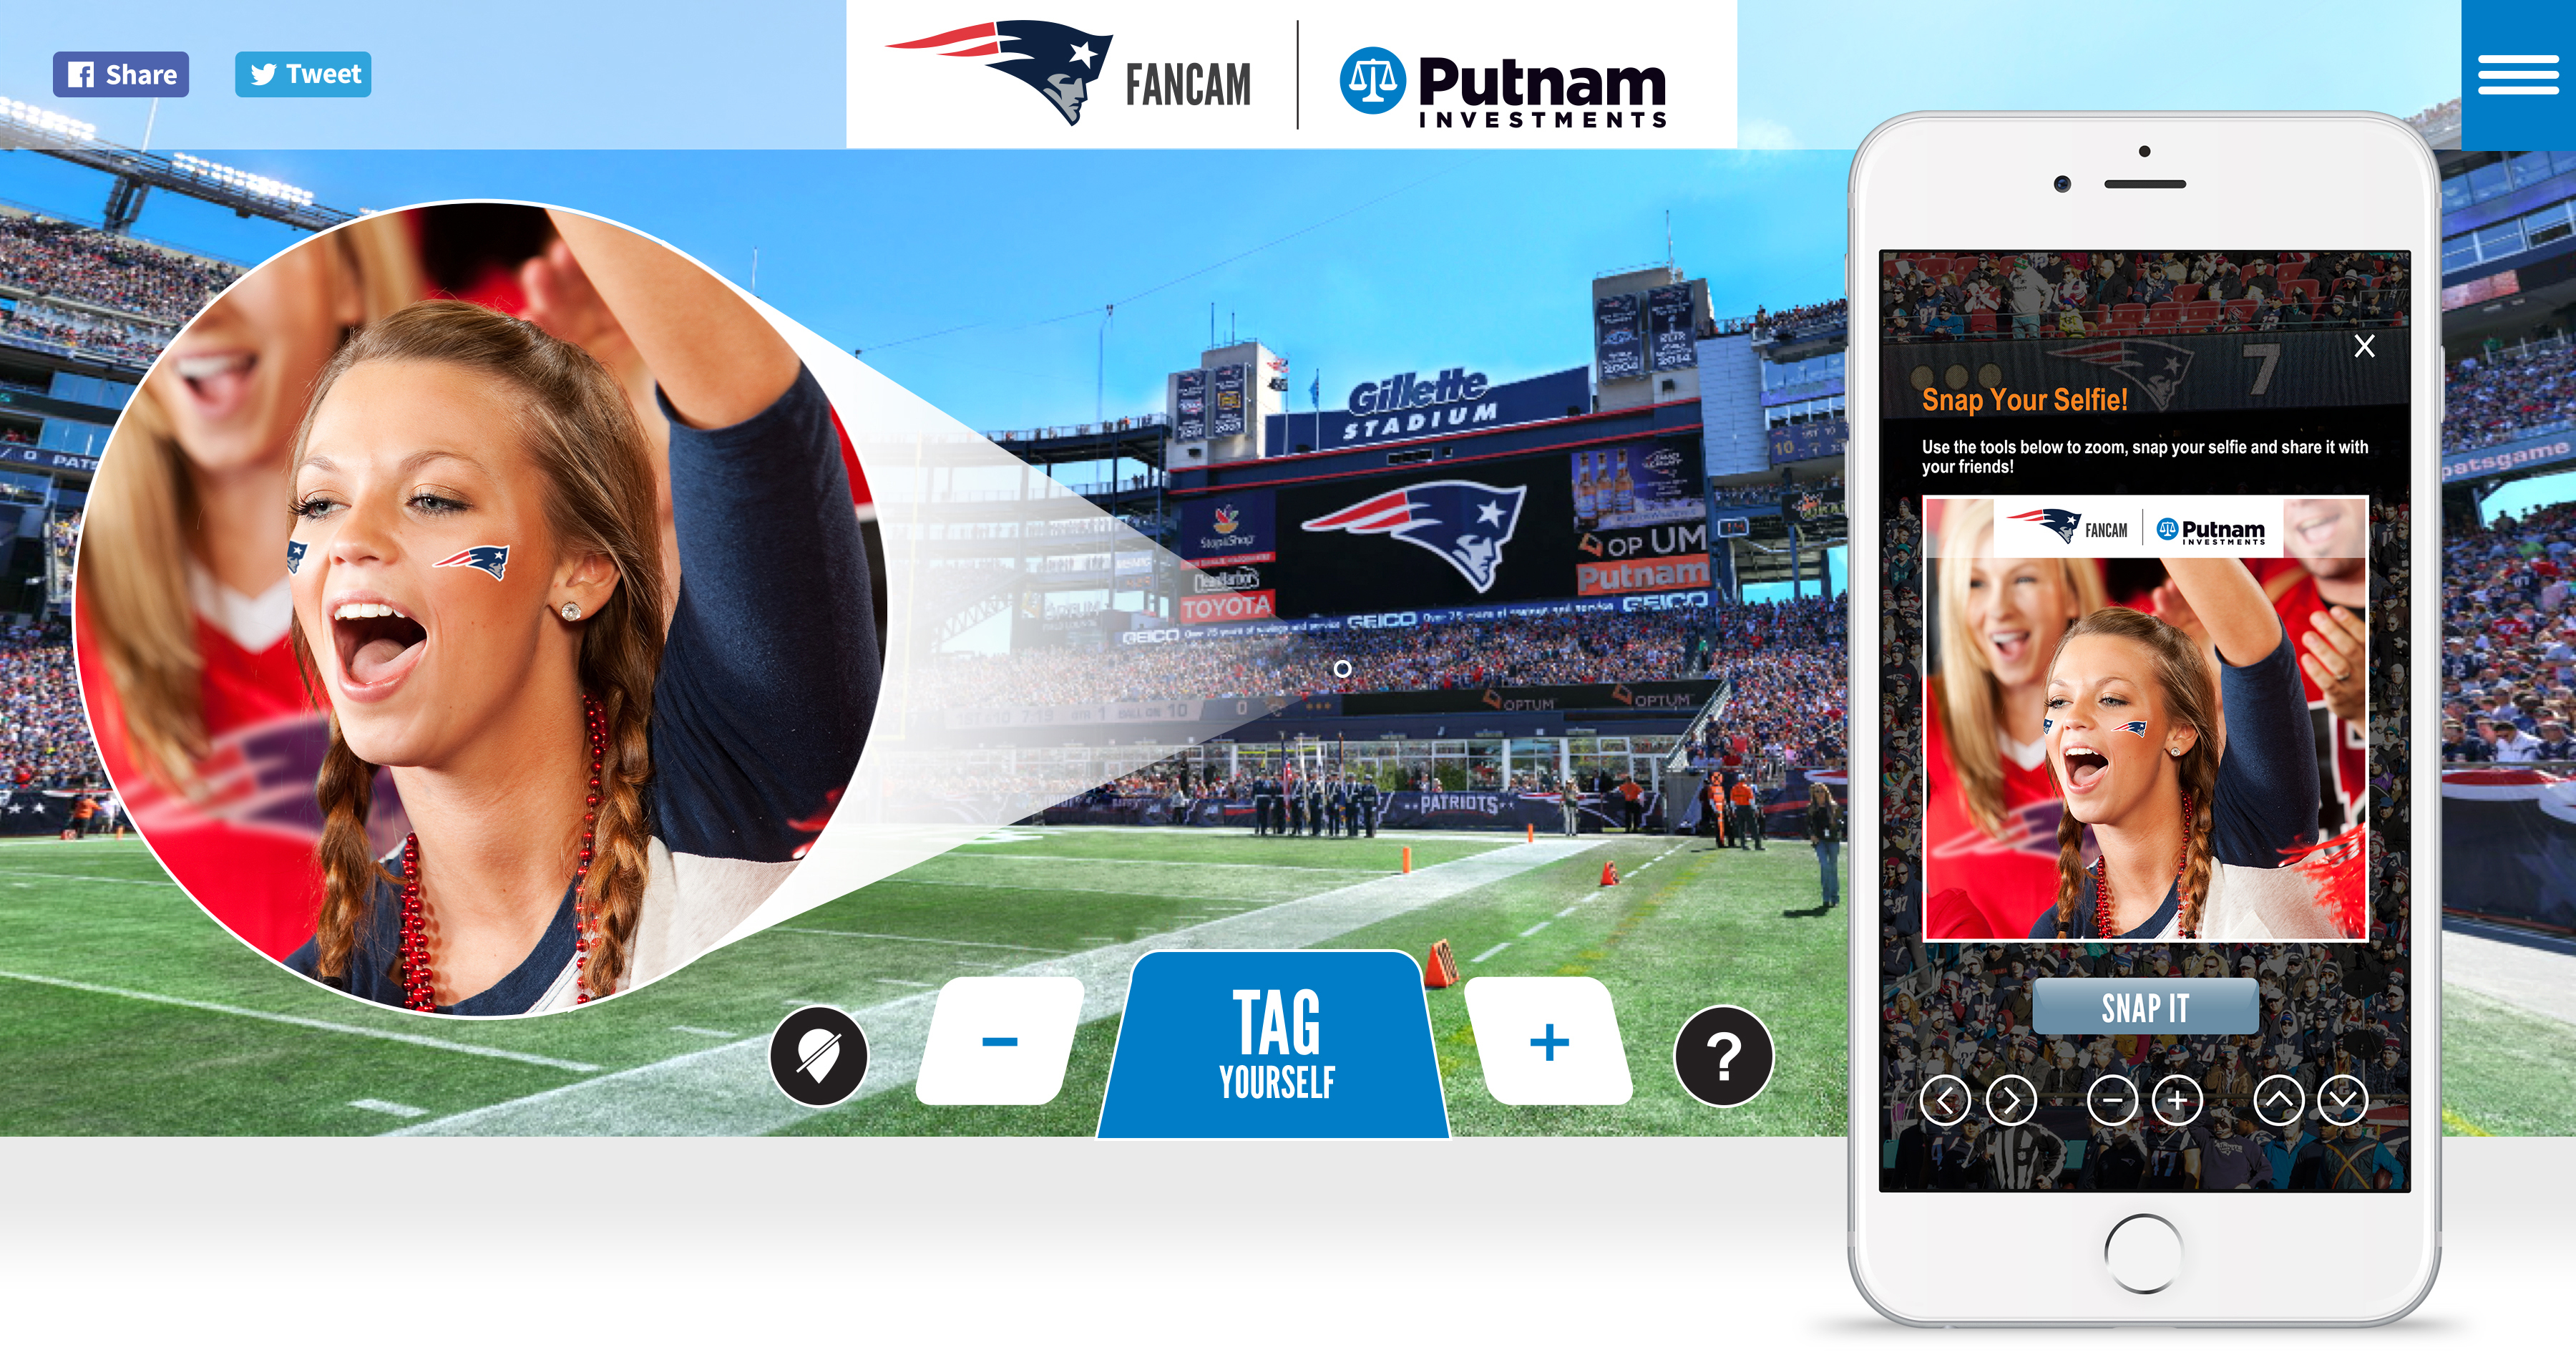 Highly Popular New England Patriots Fan Engagement Activity Fancam To Be Offered Throughout 16 Regular Season Business Wire